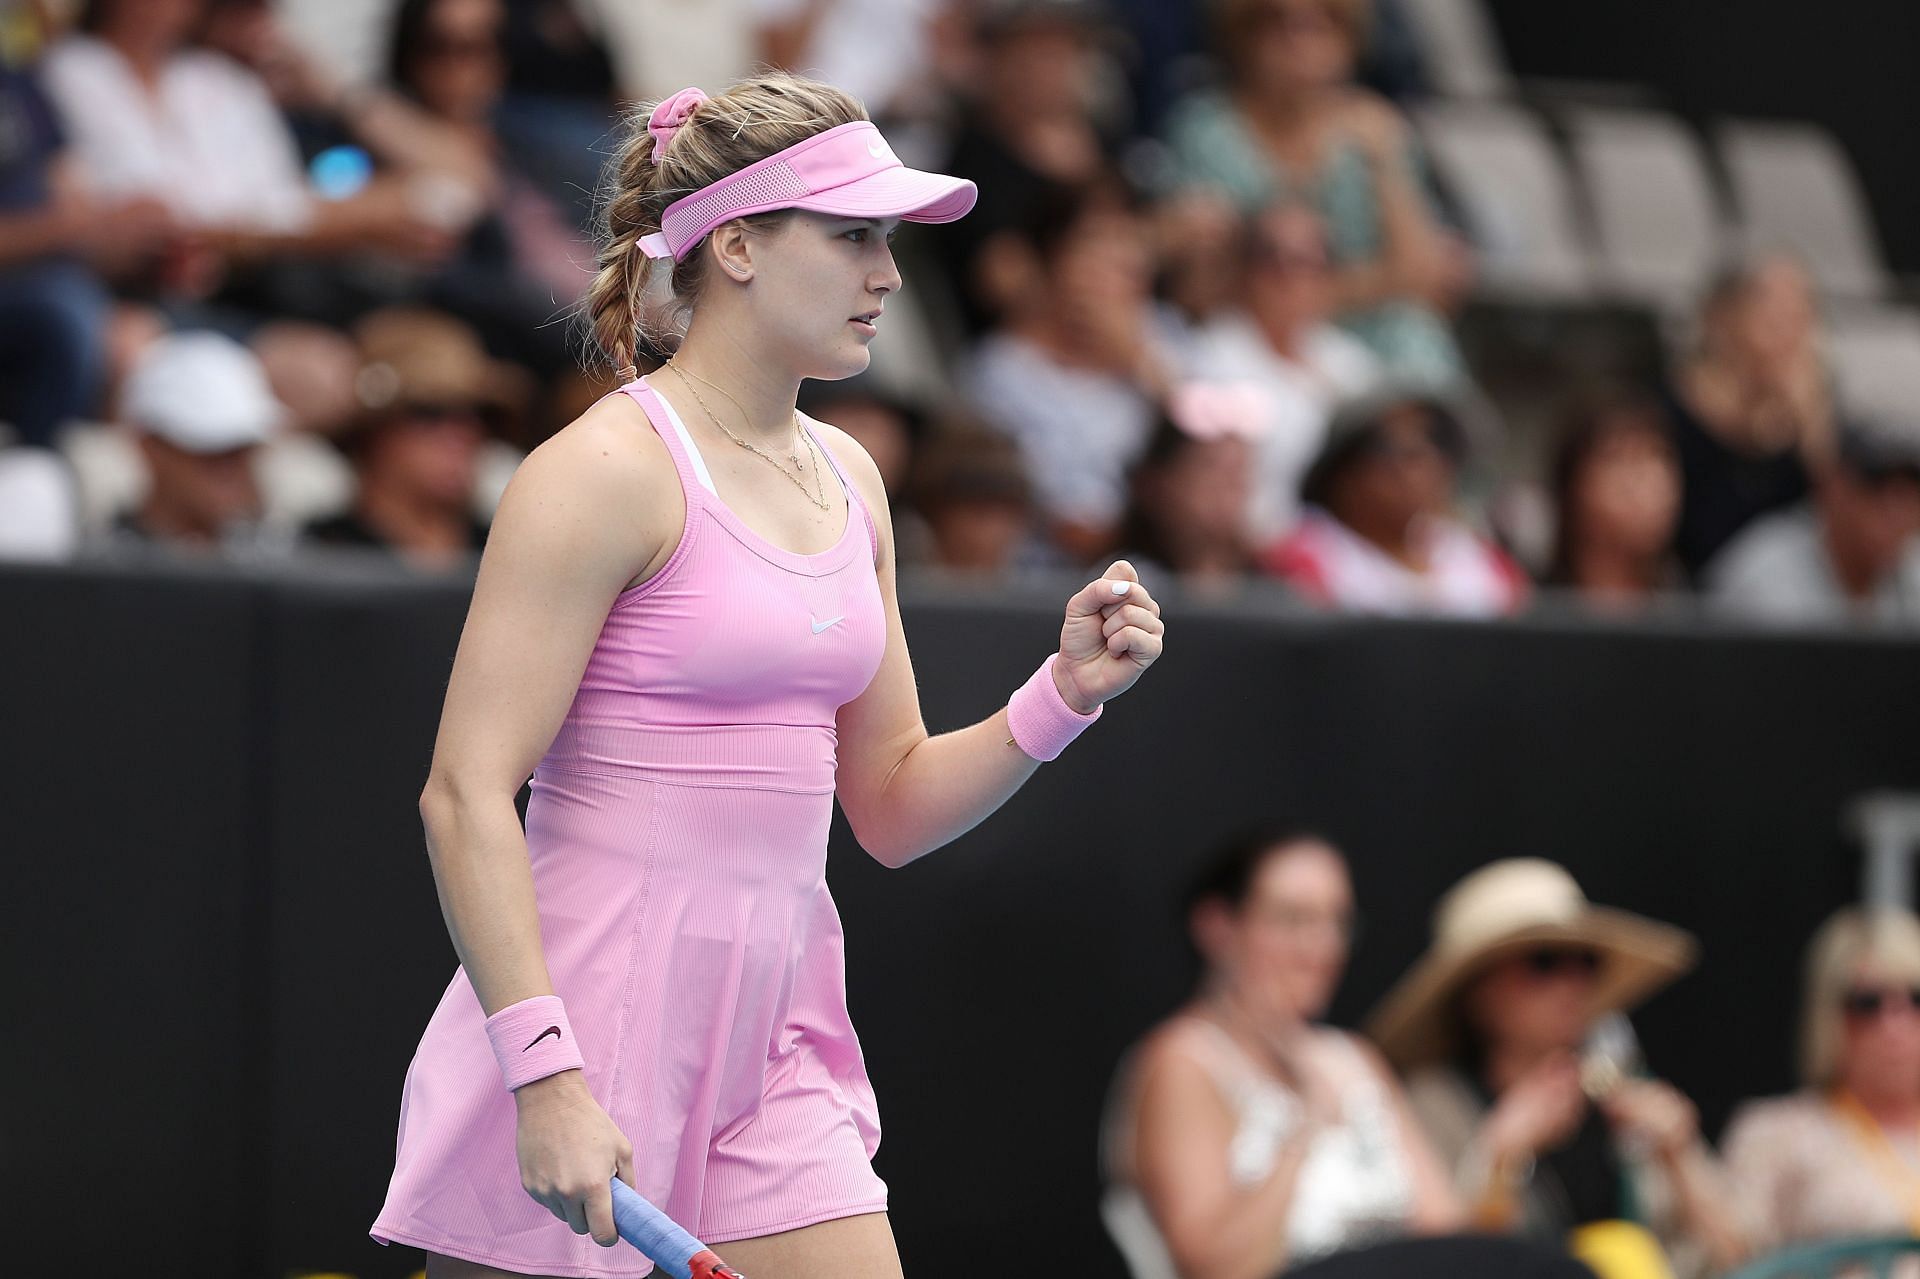 Eugenie Bouchard at a tennis event